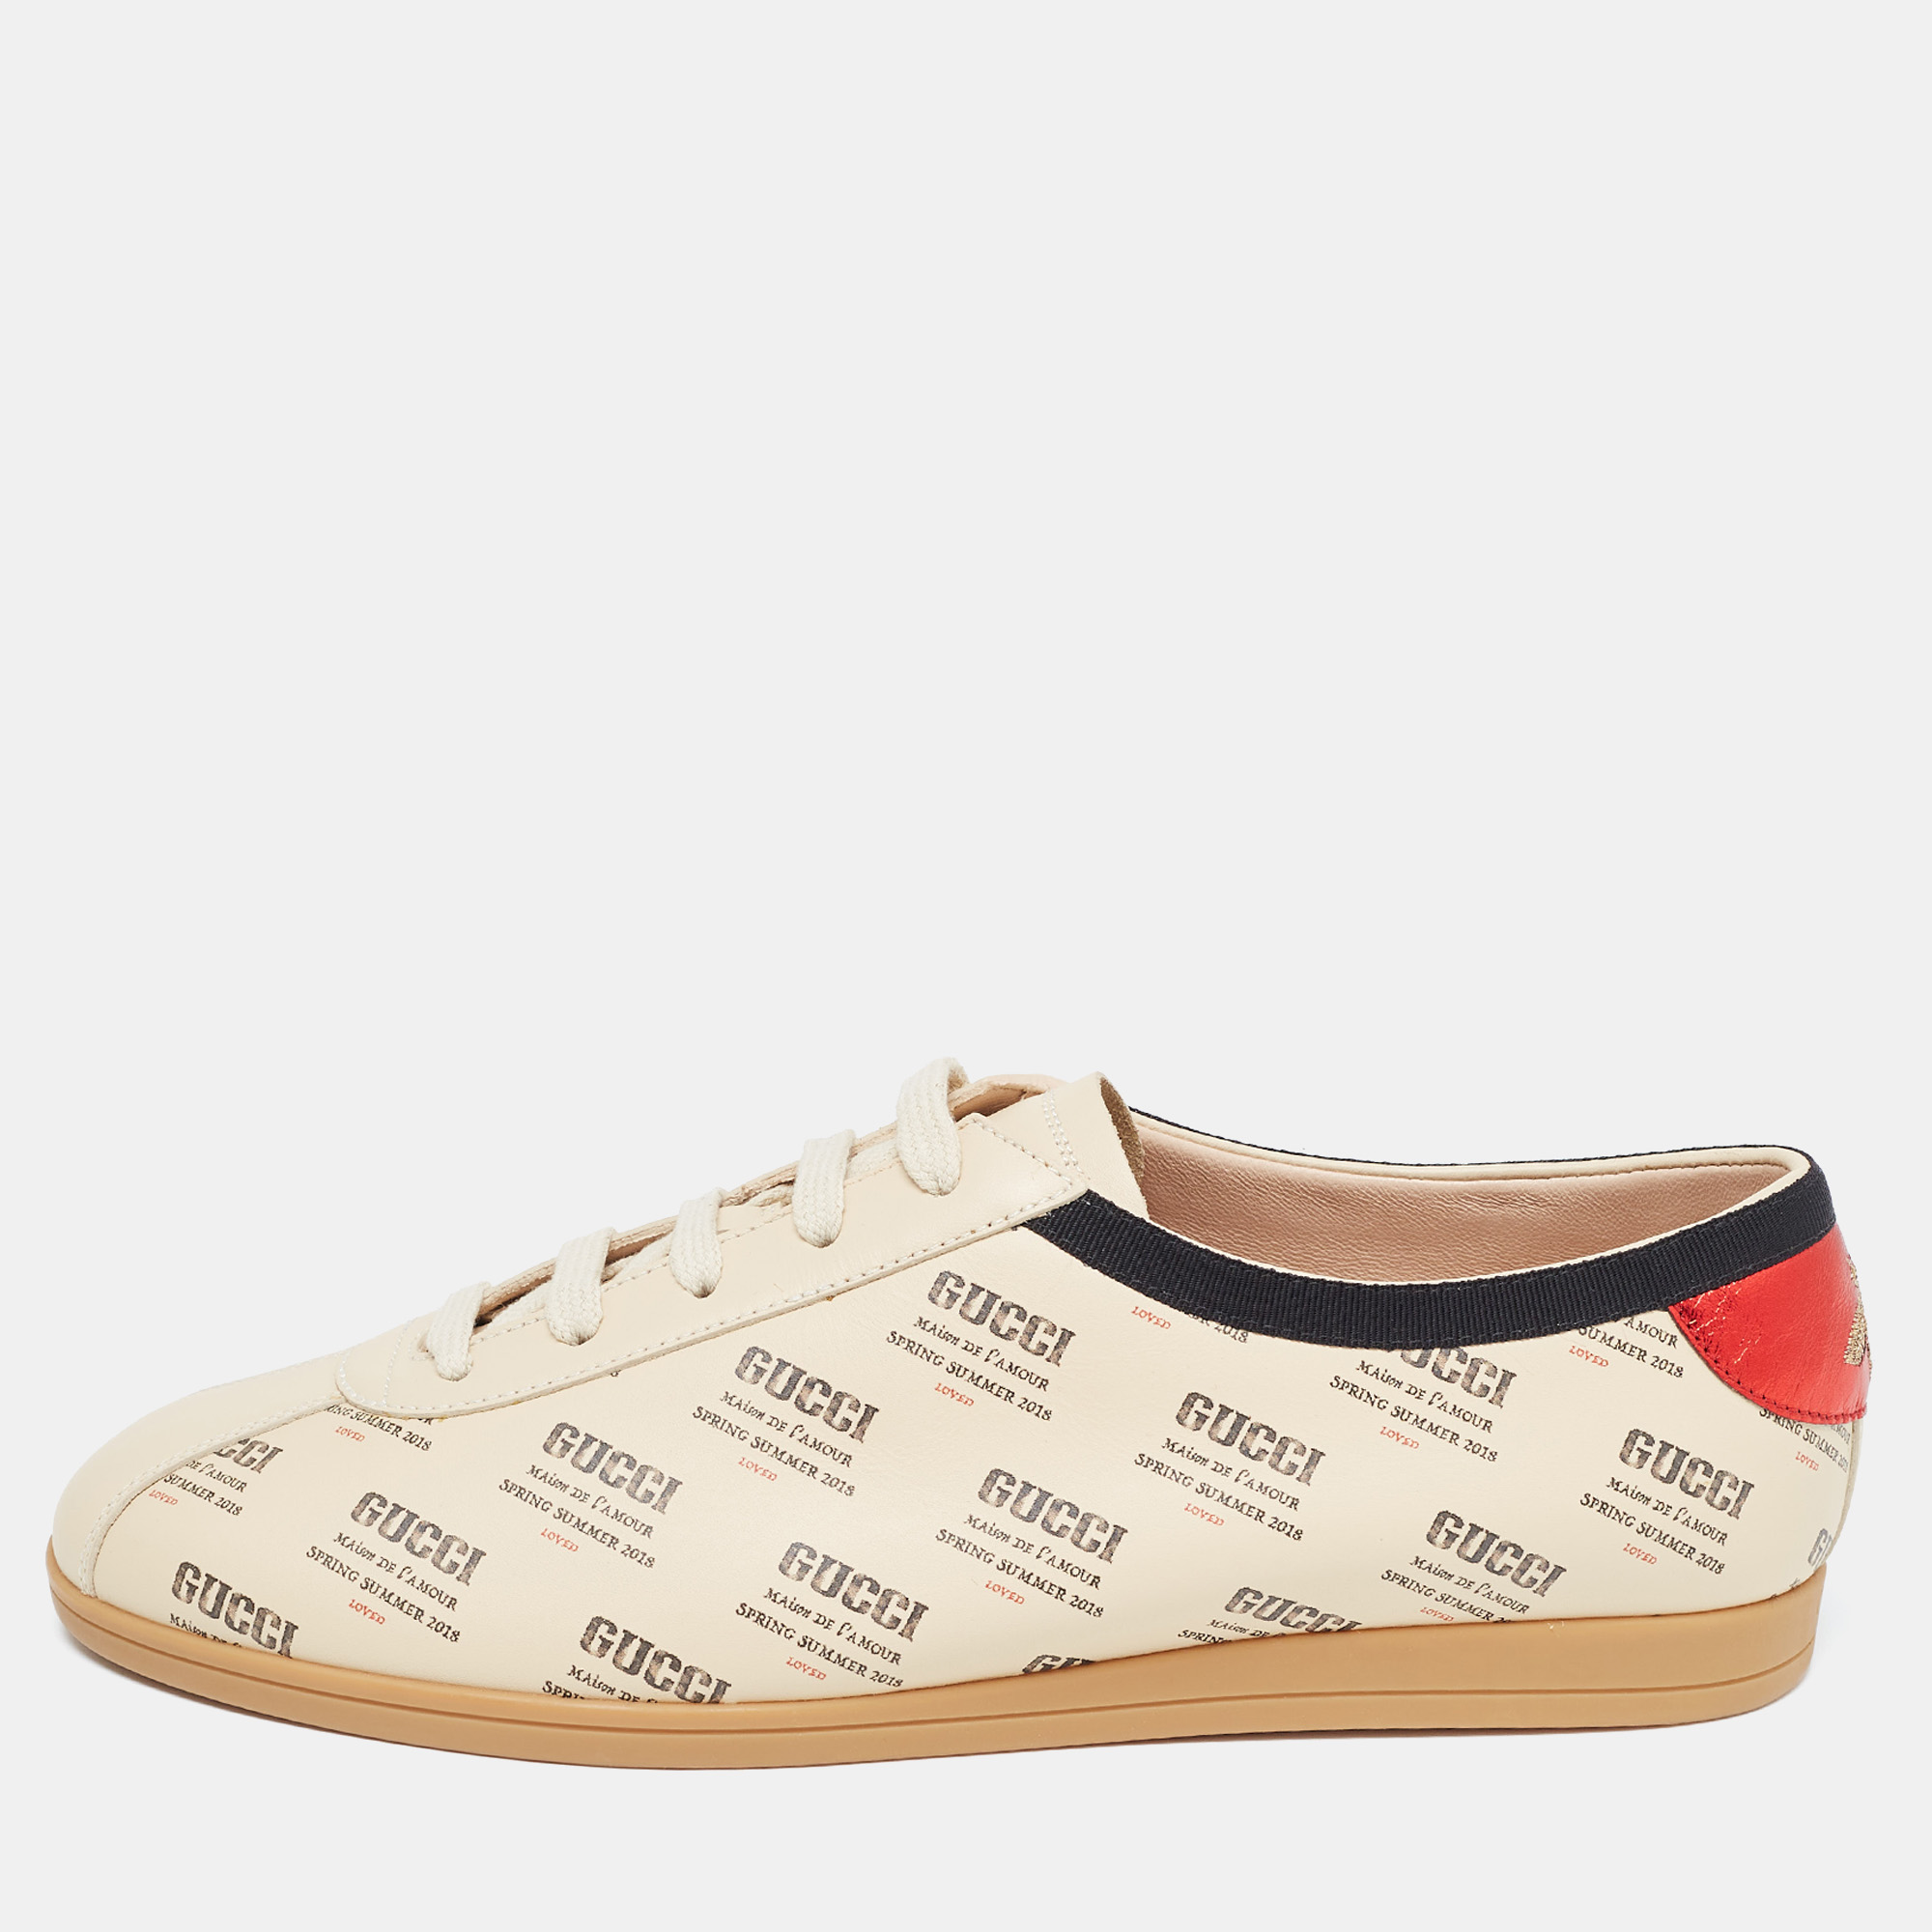 Gucci Beige Invite Print Leather Falacer Sneakers Size 40